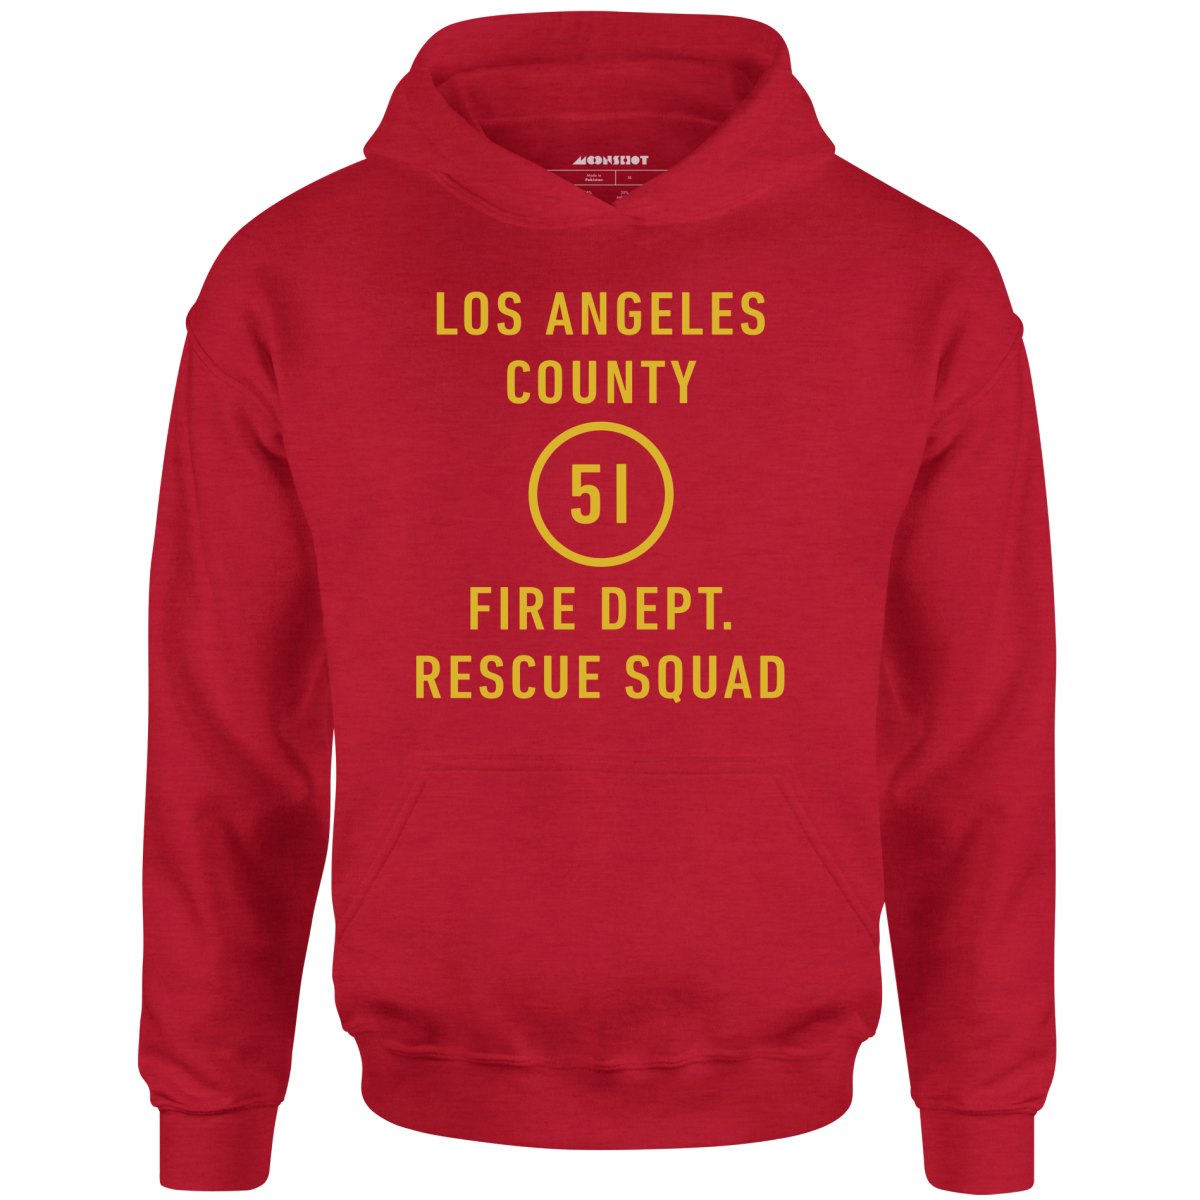 Emergency - Los Angeles County Fire Dept. Squad 51 - Unisex Hoodie